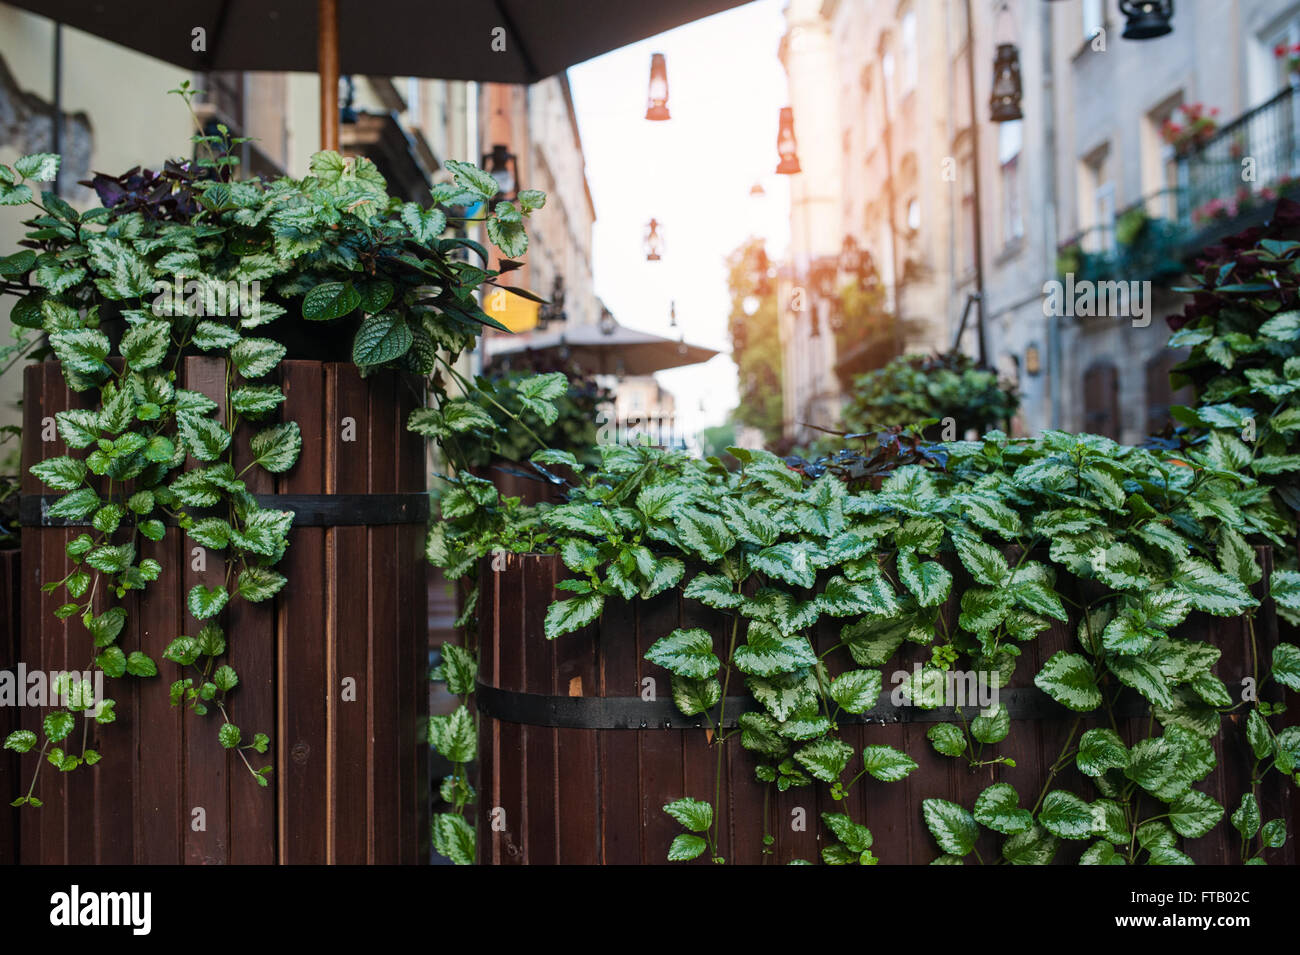 decoration of green leaves in an outdoor cafe Stock Photo